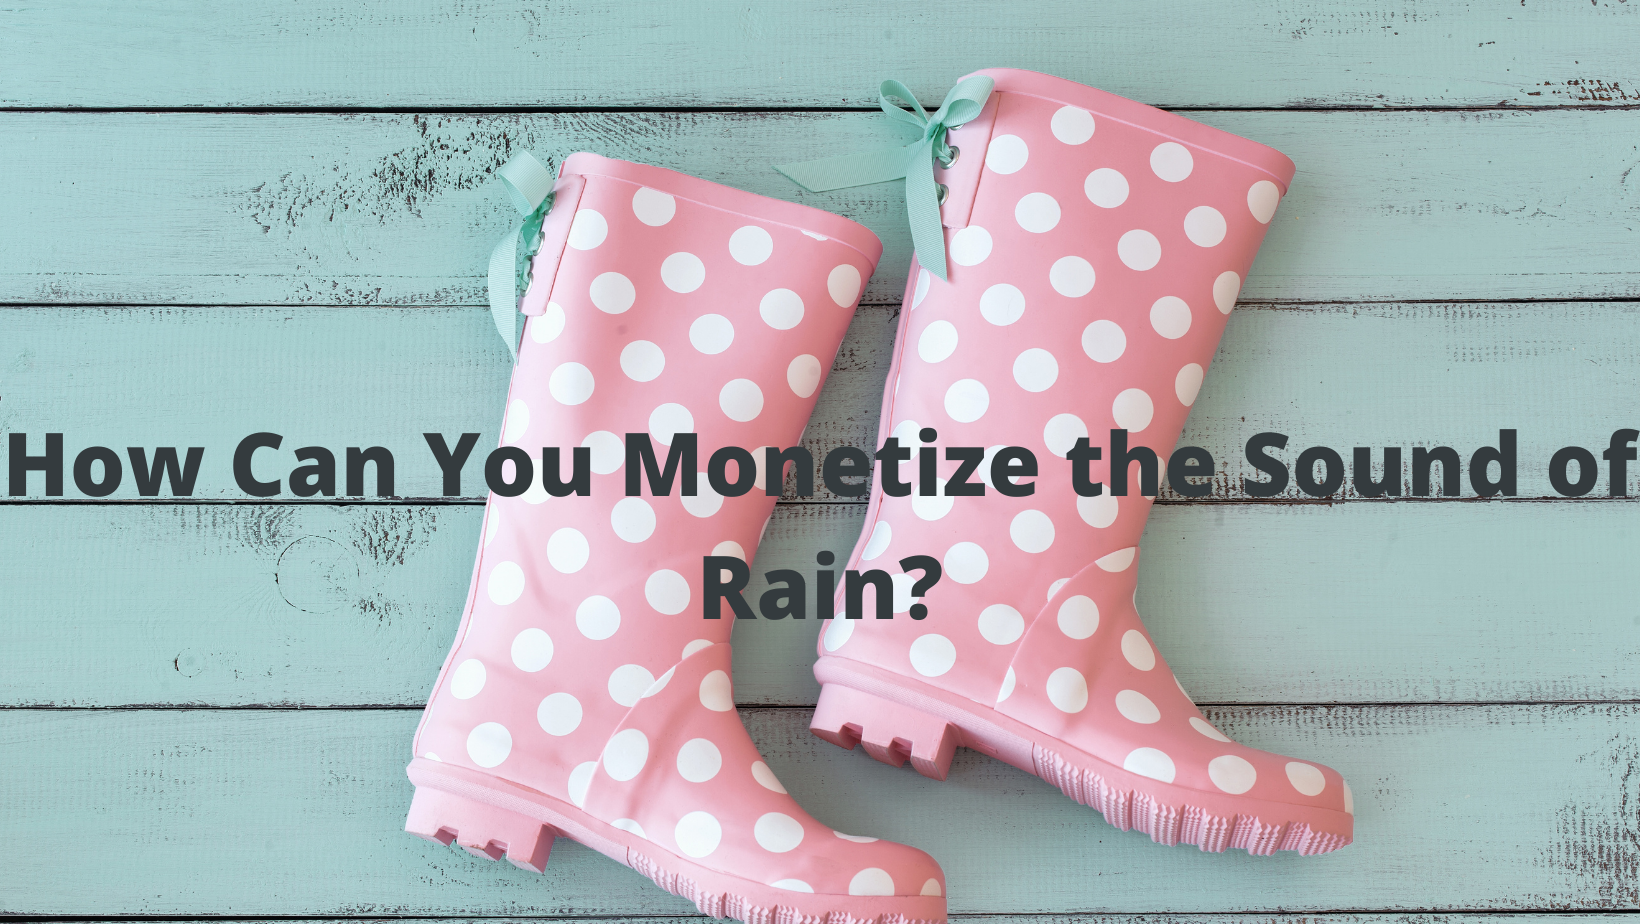 How Can You Monetize the Sound of Rain?